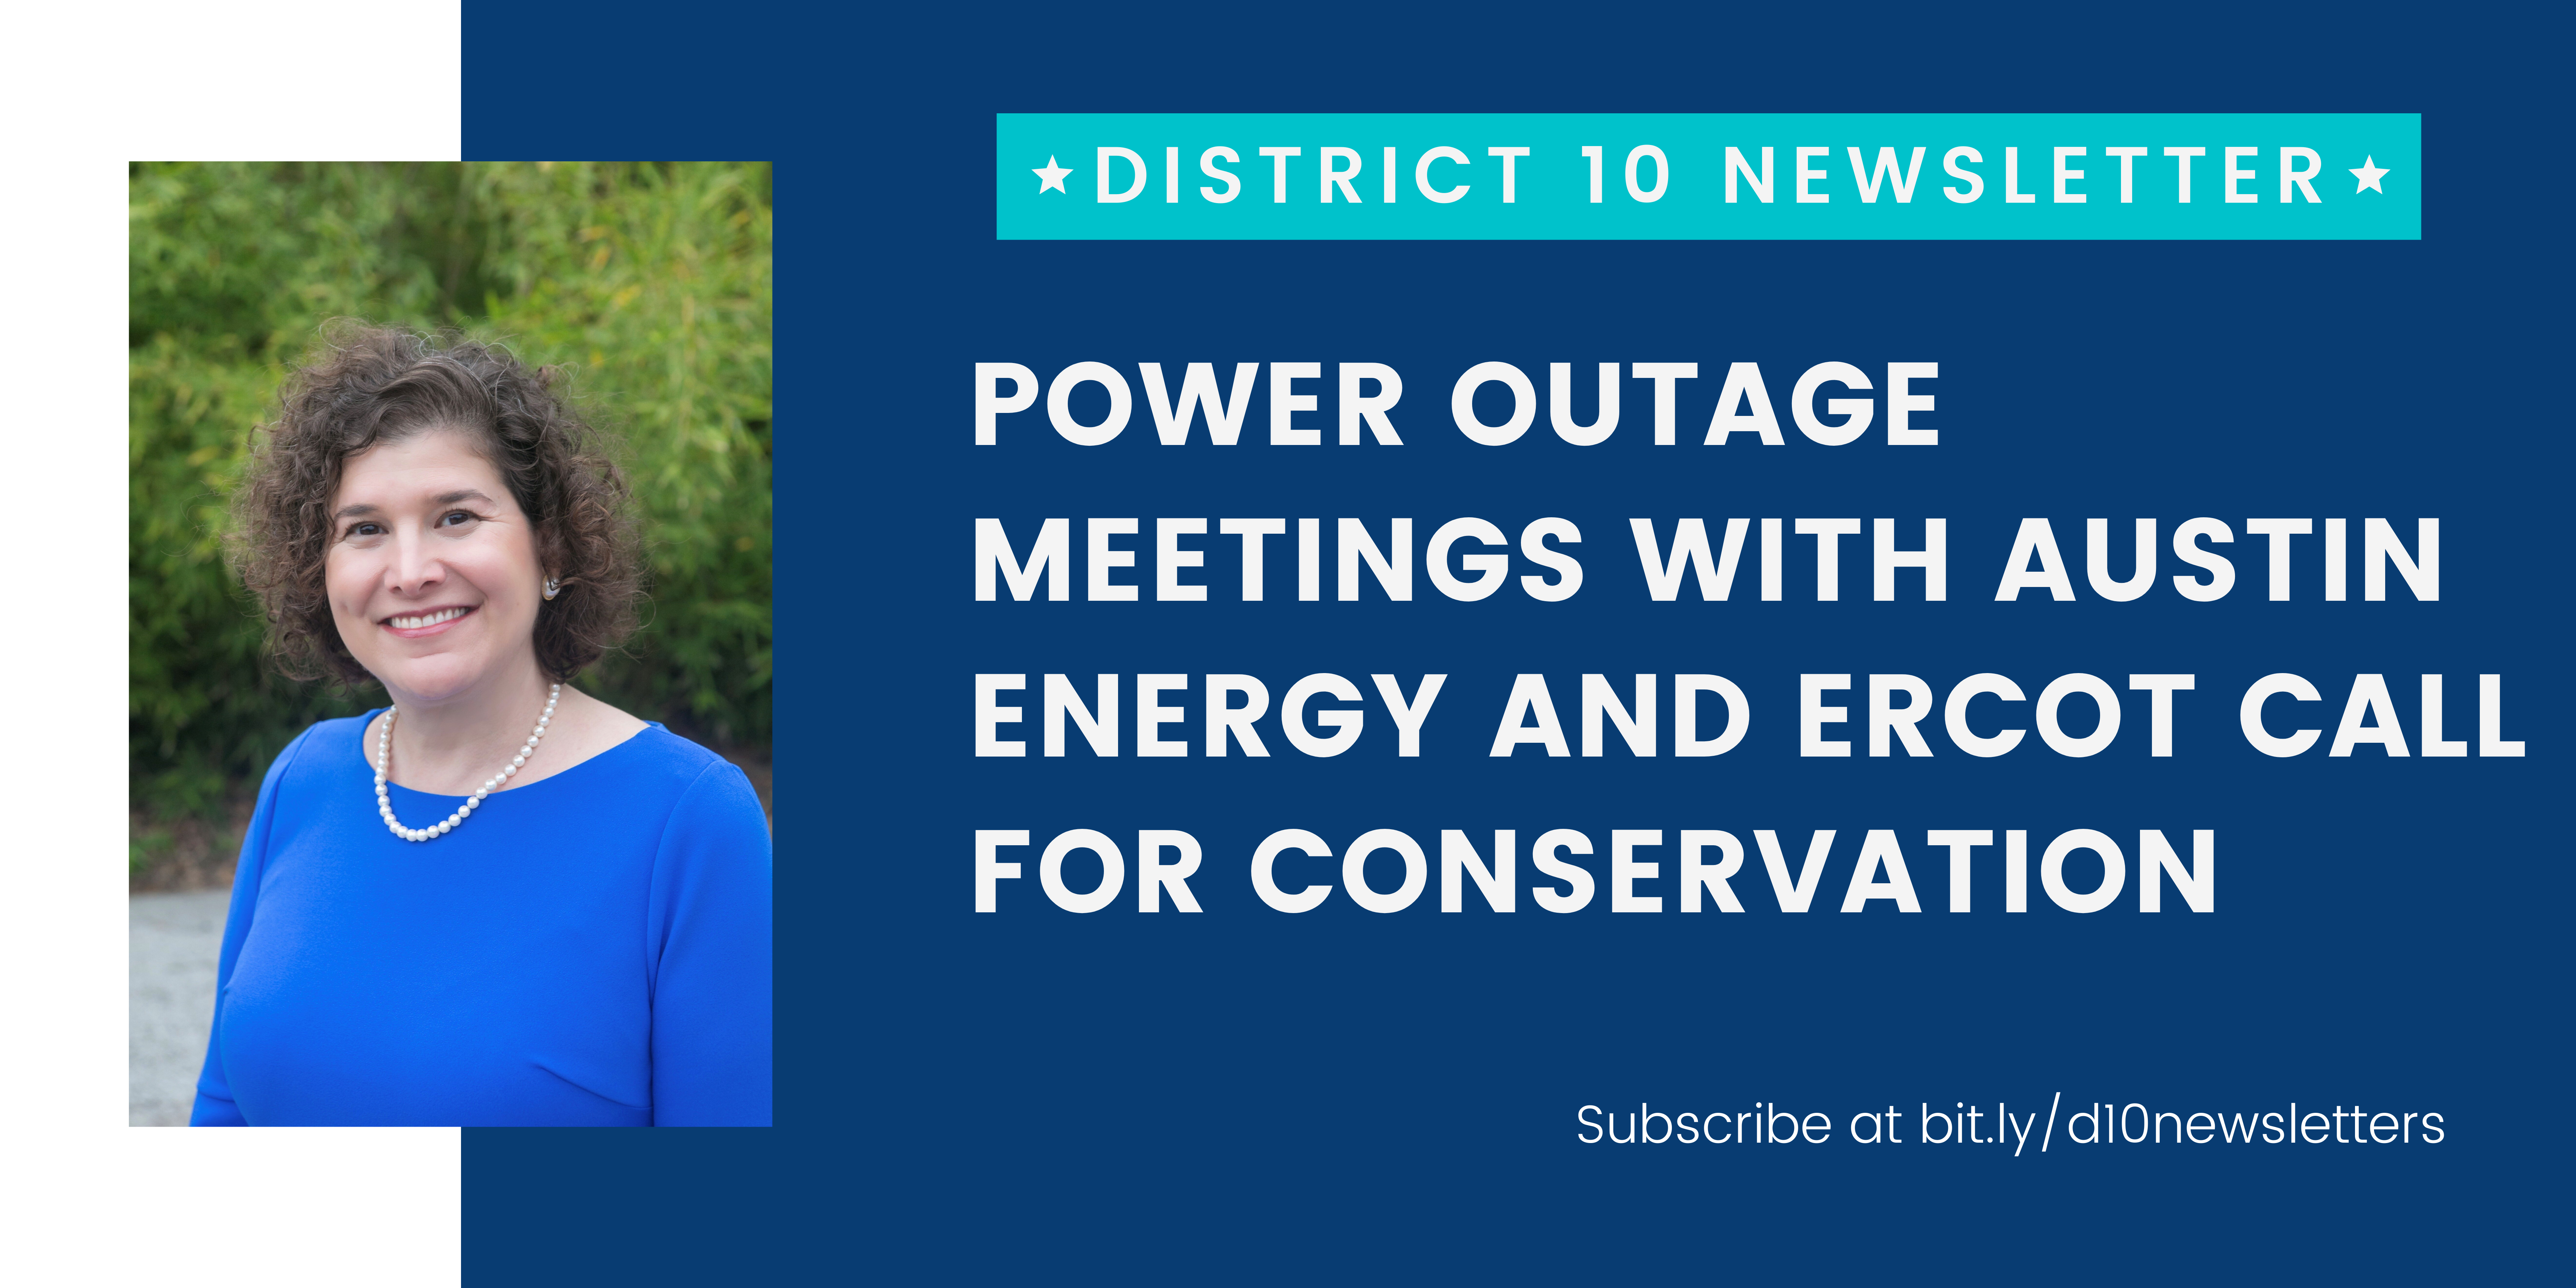 District 10 Newsletter; Power Outage Meetings with Austin Energy. Subscribe at bit.ly/d10newsletters